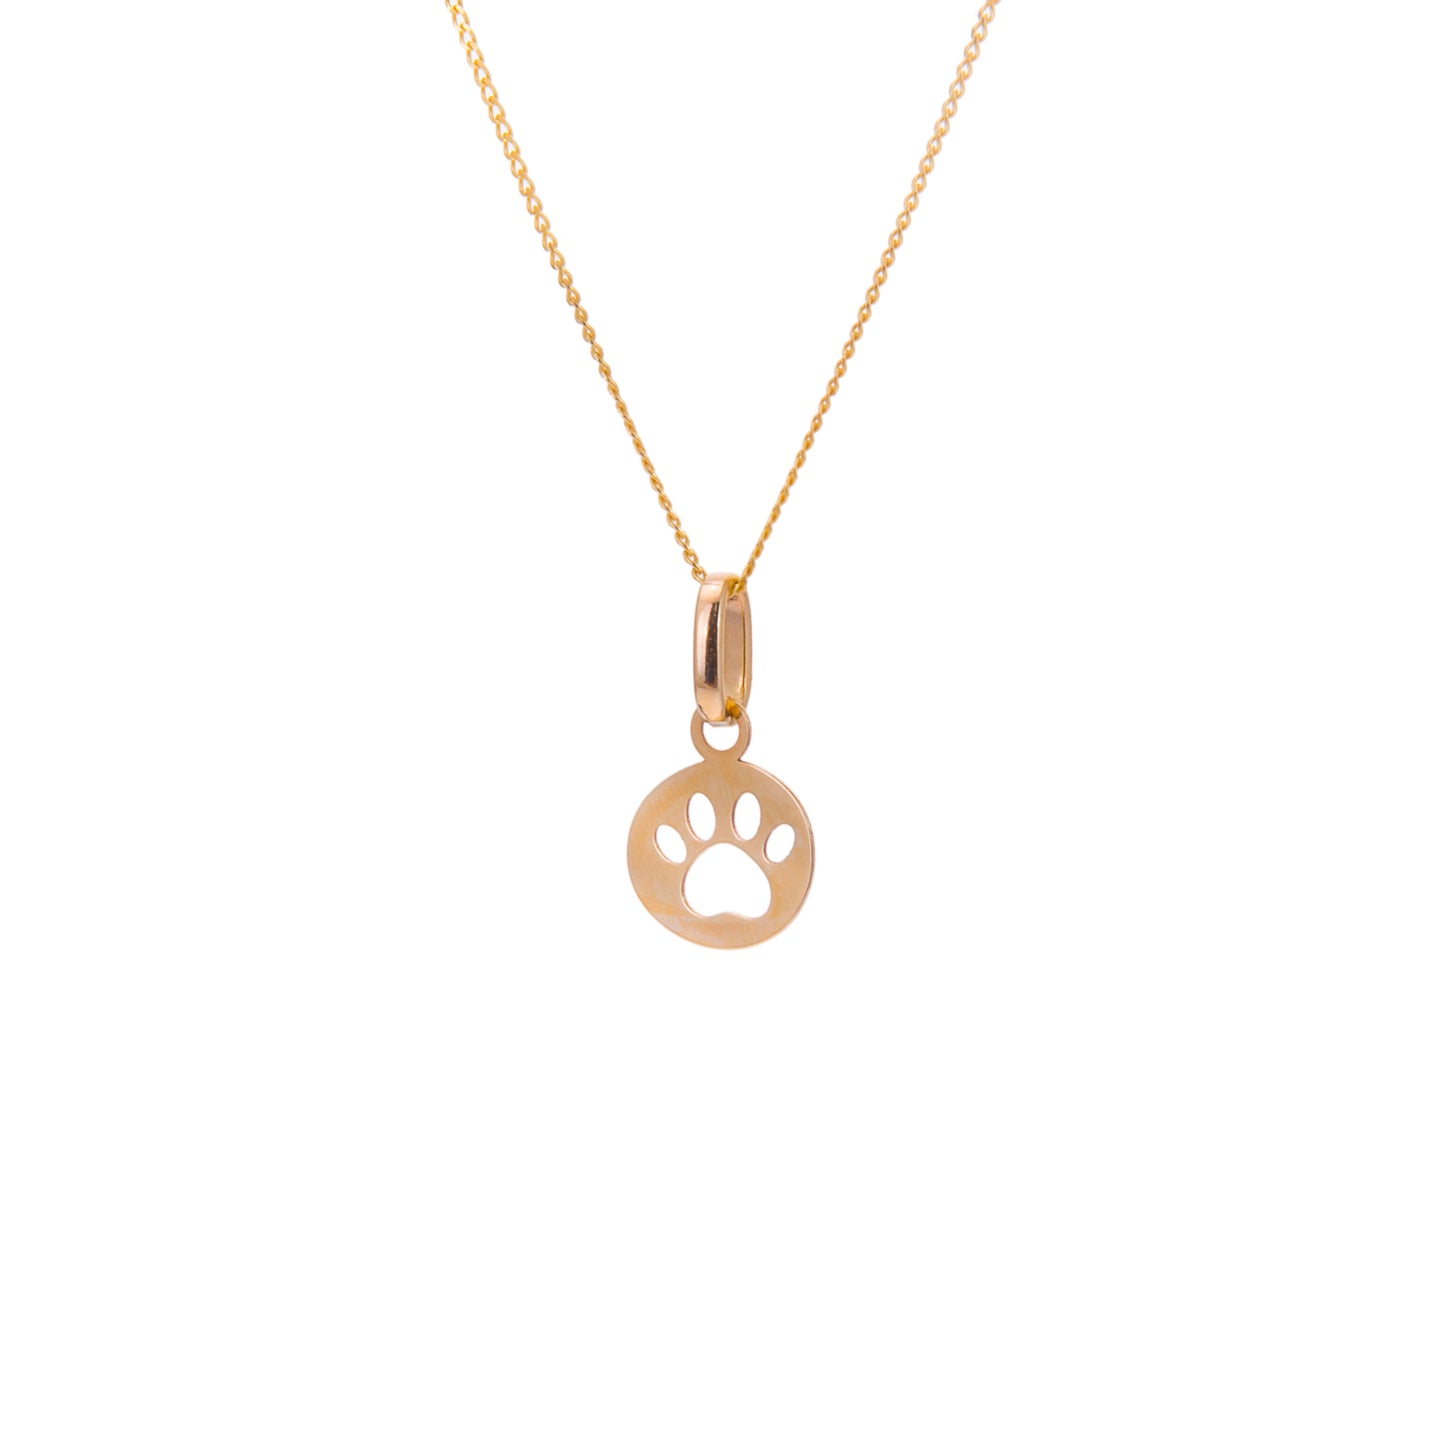 Small 9ct Gold Paw Print Necklace - 16 - 20 Inches